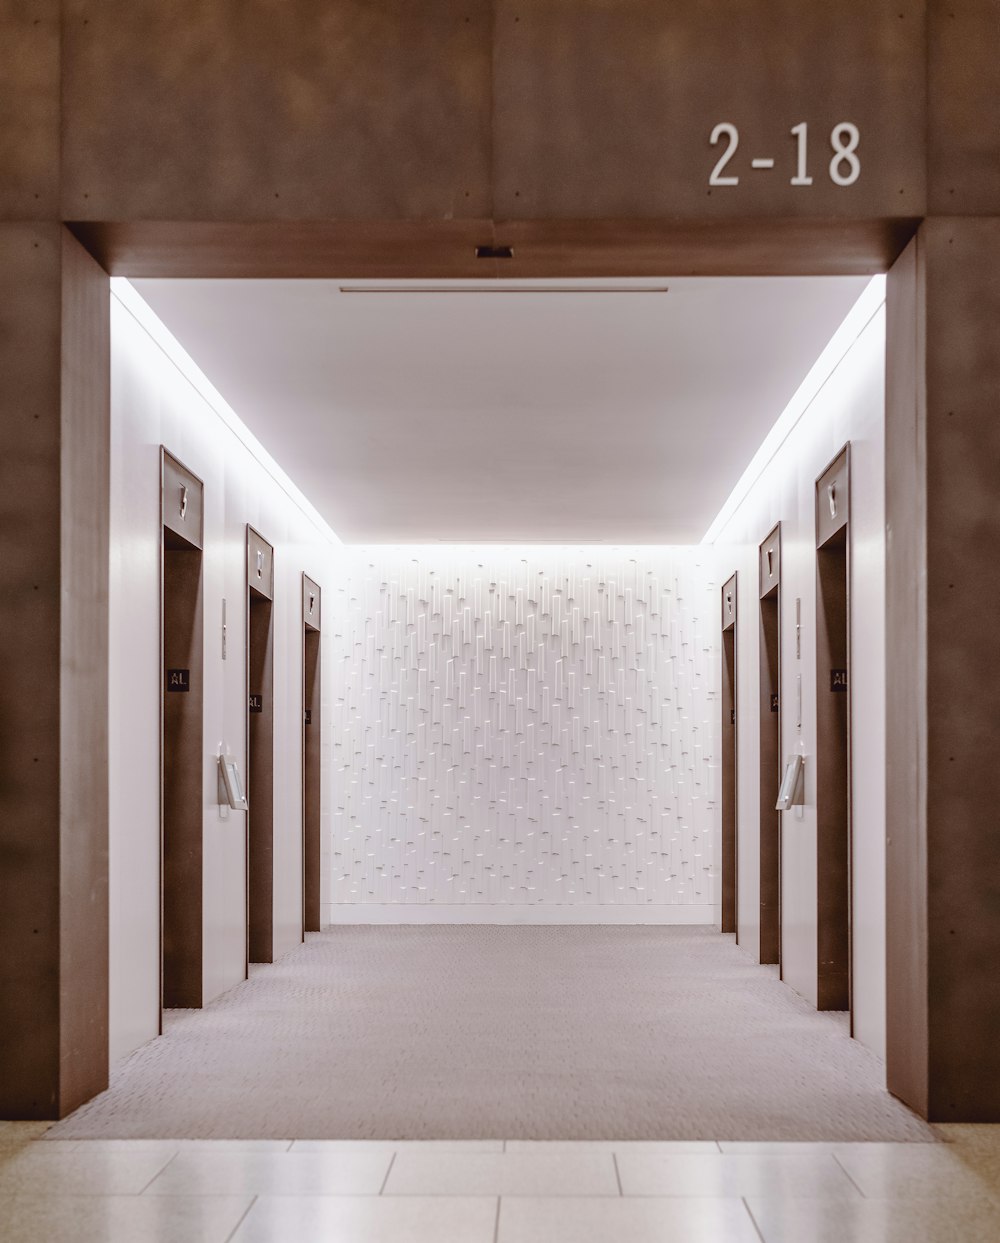 a long hallway with a number on the wall